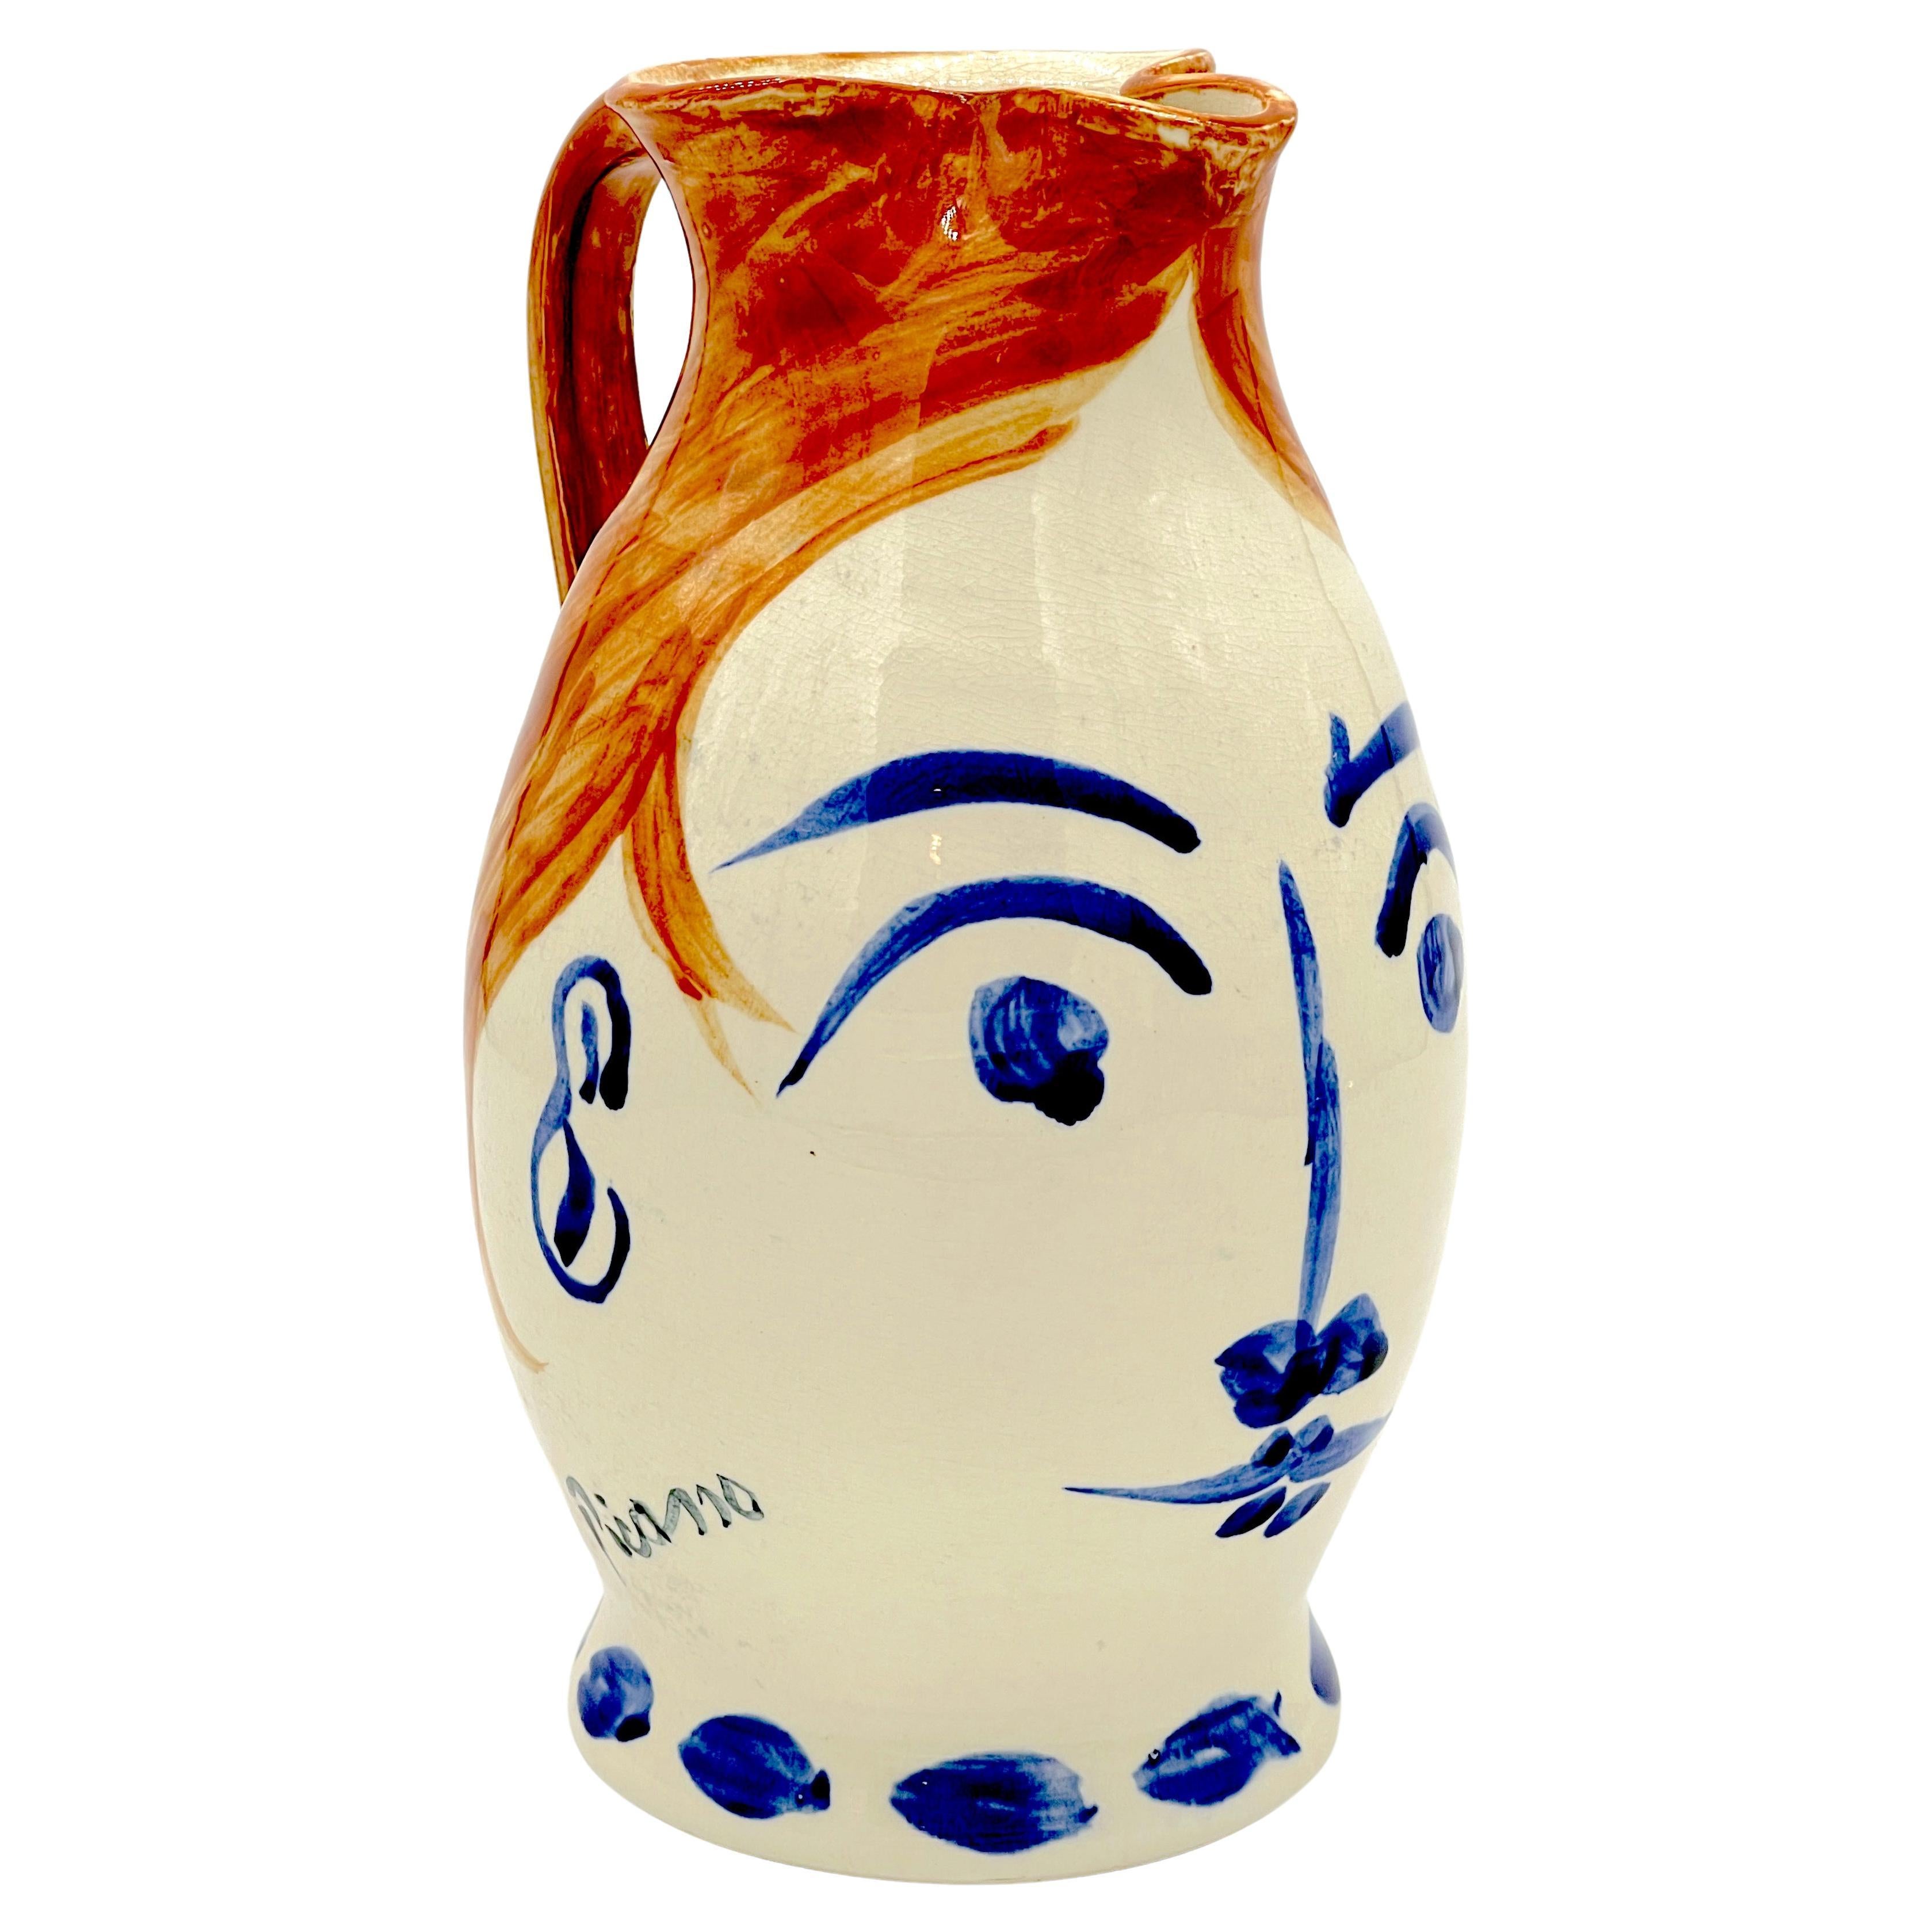 What is the colorful Mexican pottery called?